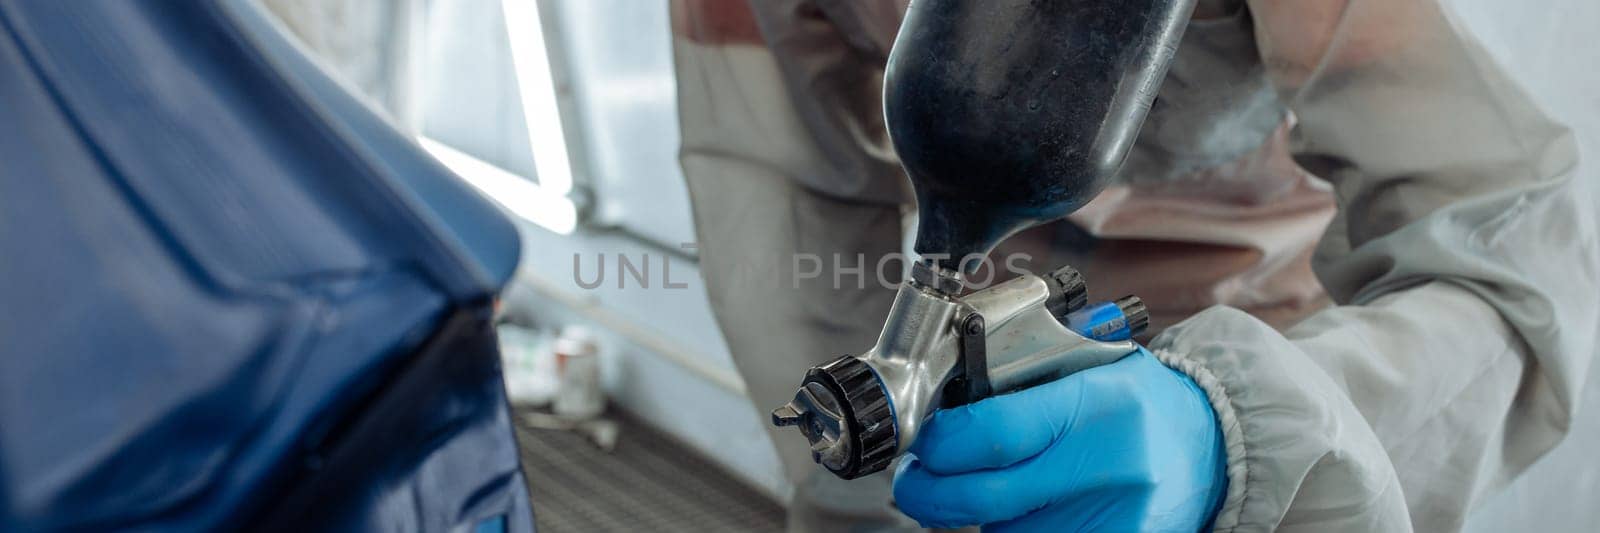 Banner . automobile repairman painter hand in protective glove with airbrush pulverizer painting car body in paint chamber